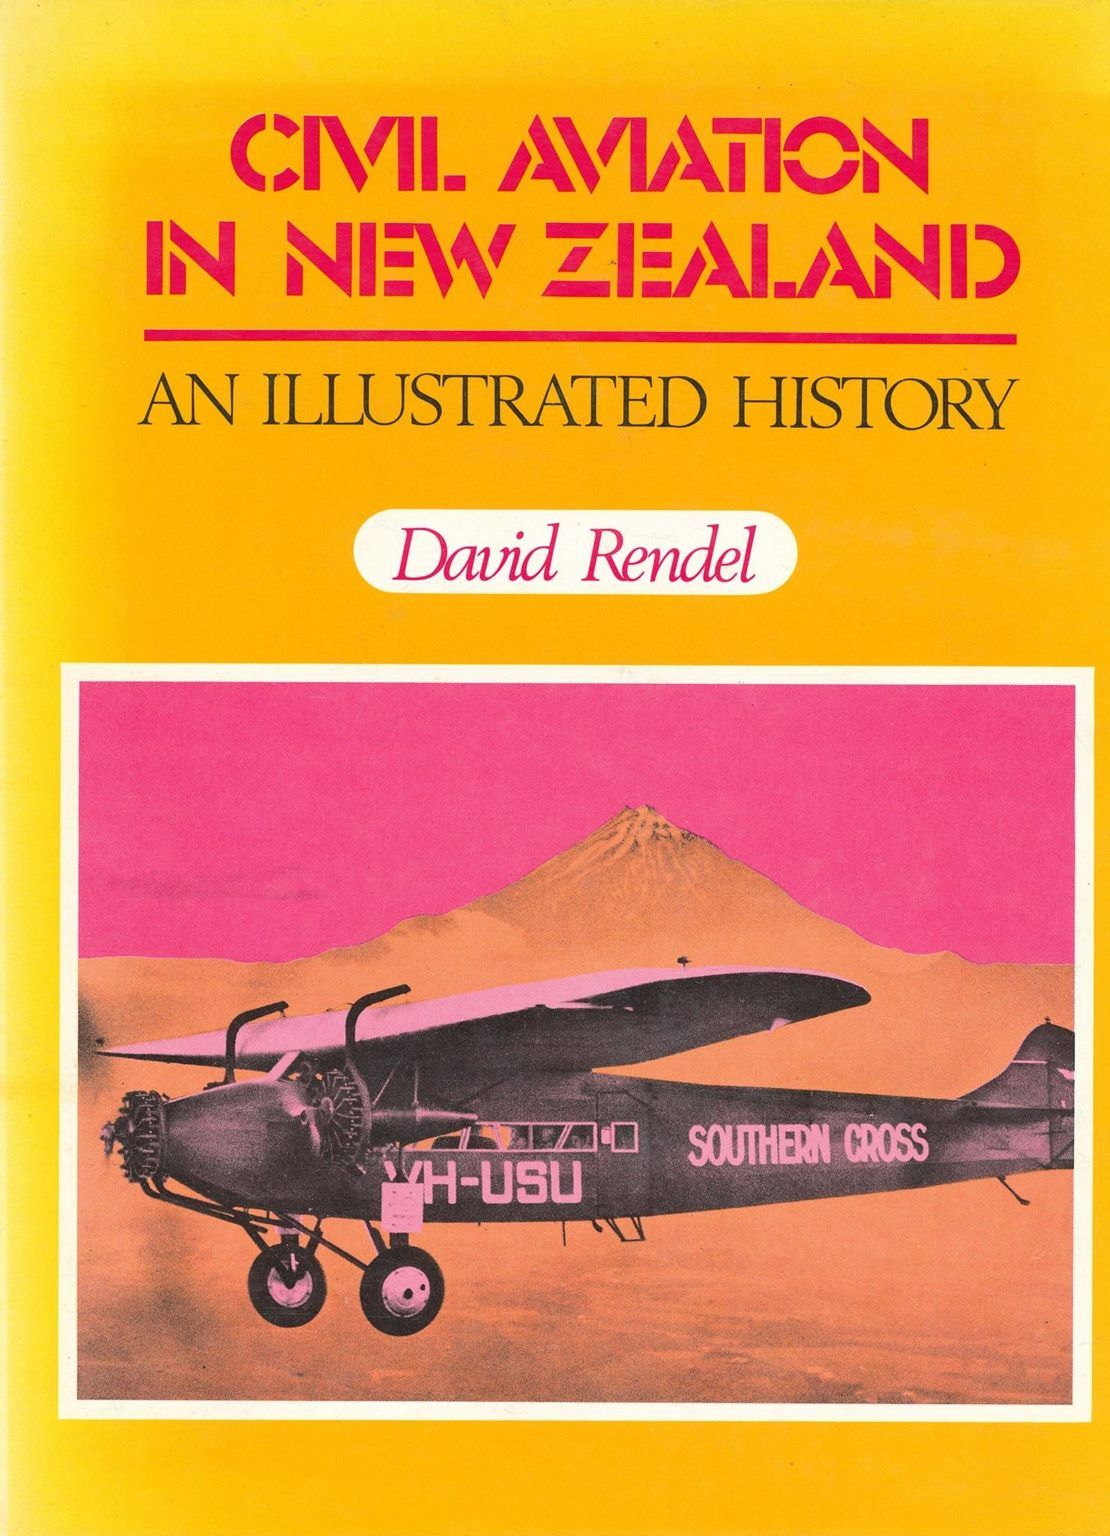 CIVIL AVIATION IN NEW ZEALAND: An Illustrated History